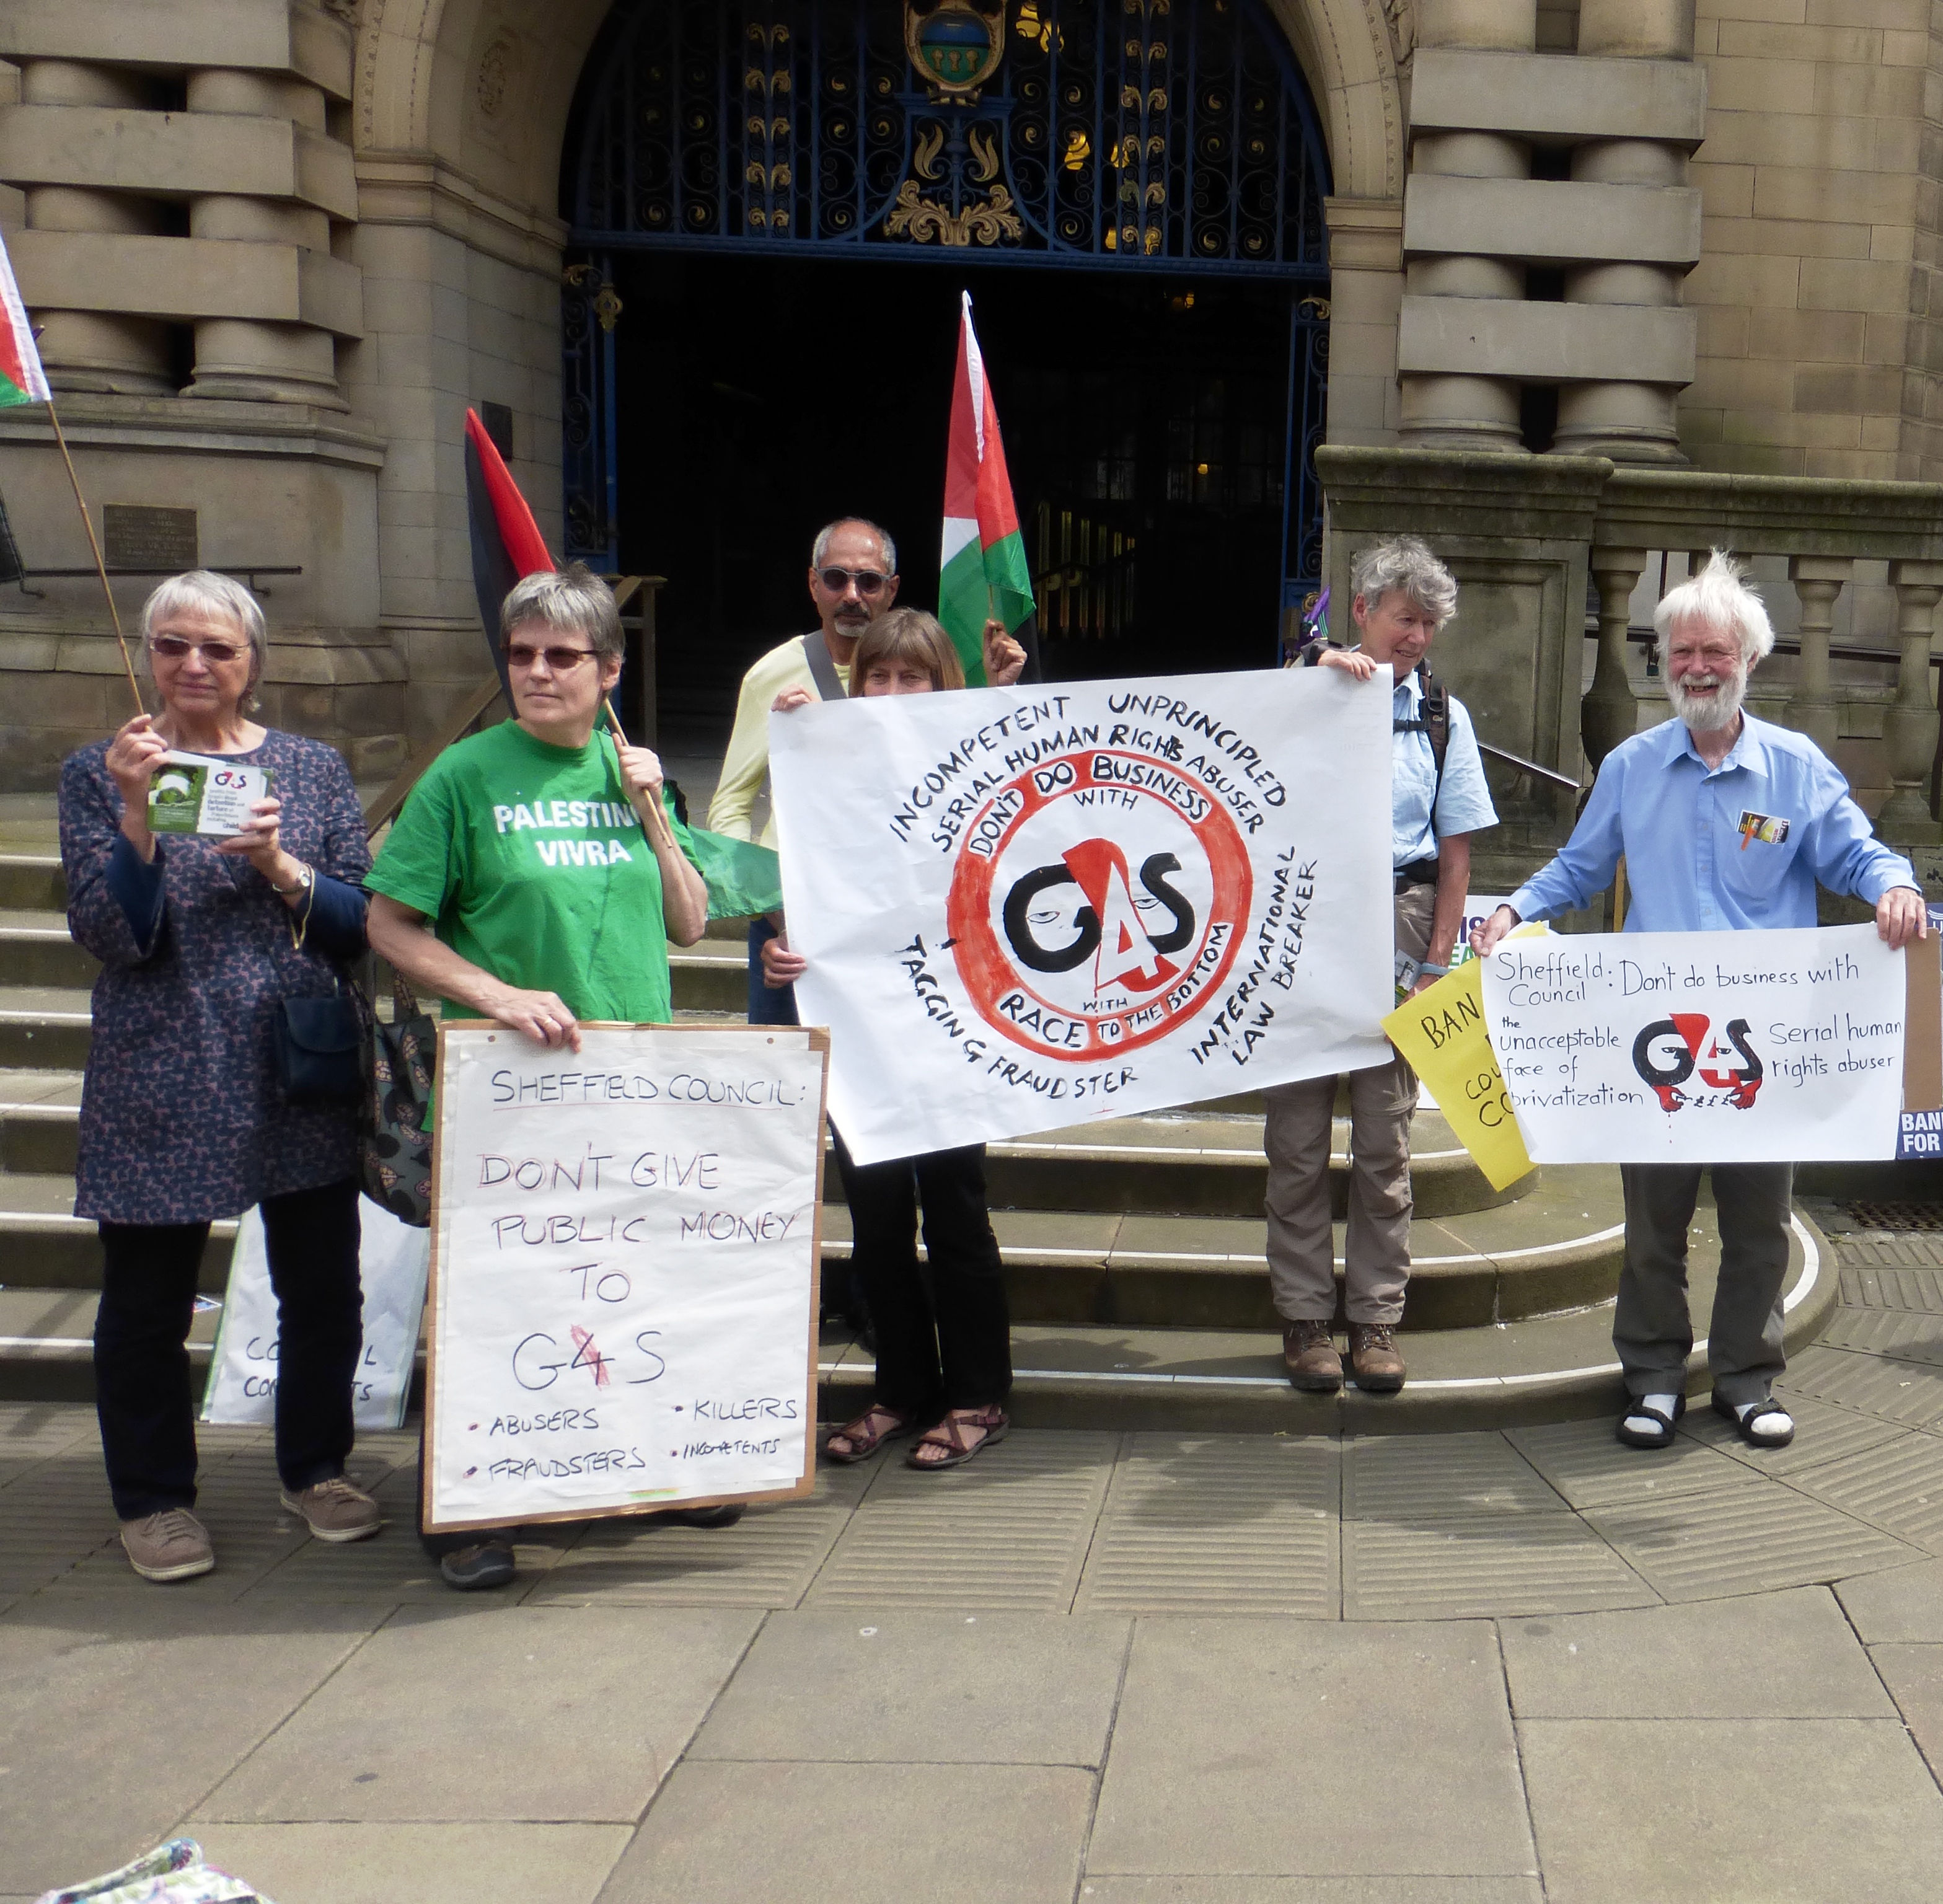 Tell Sheffield Council on October 1st: No more public money for G4S in Sheffield